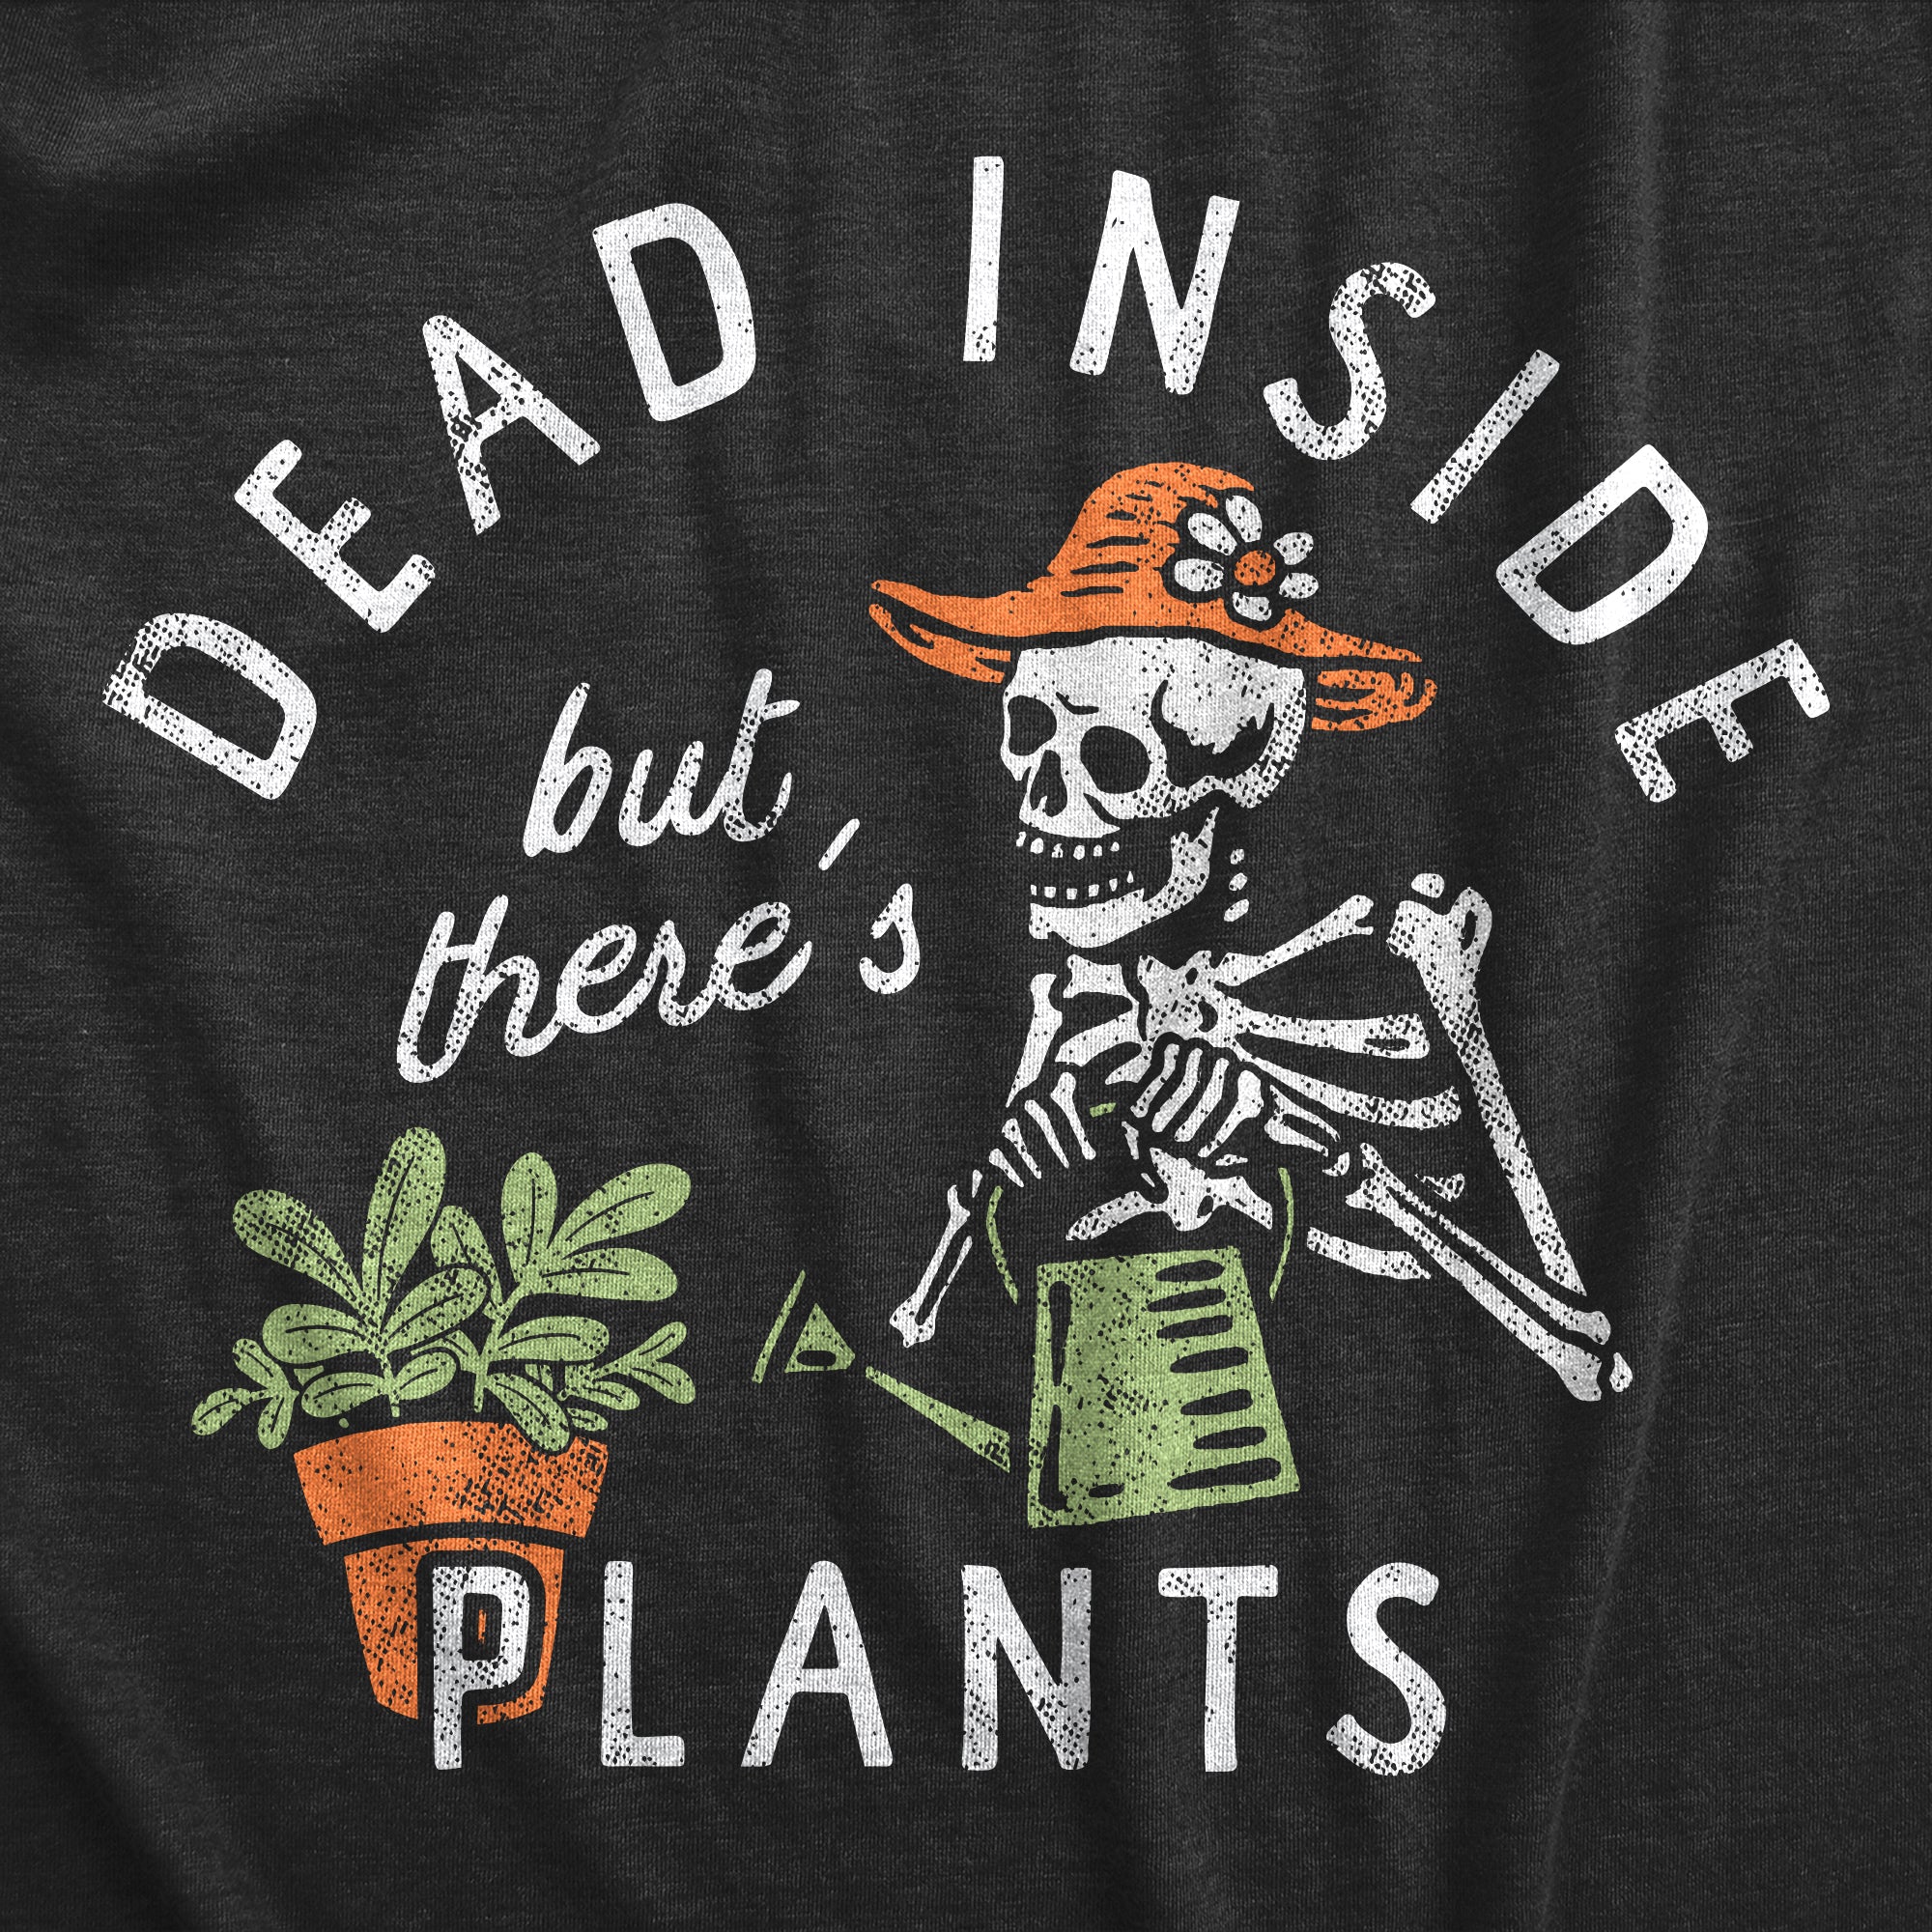 Funny Heather Black - PLANTS Dead Inside But Theres Plants Mens T Shirt Nerdy Sarcastic Tee